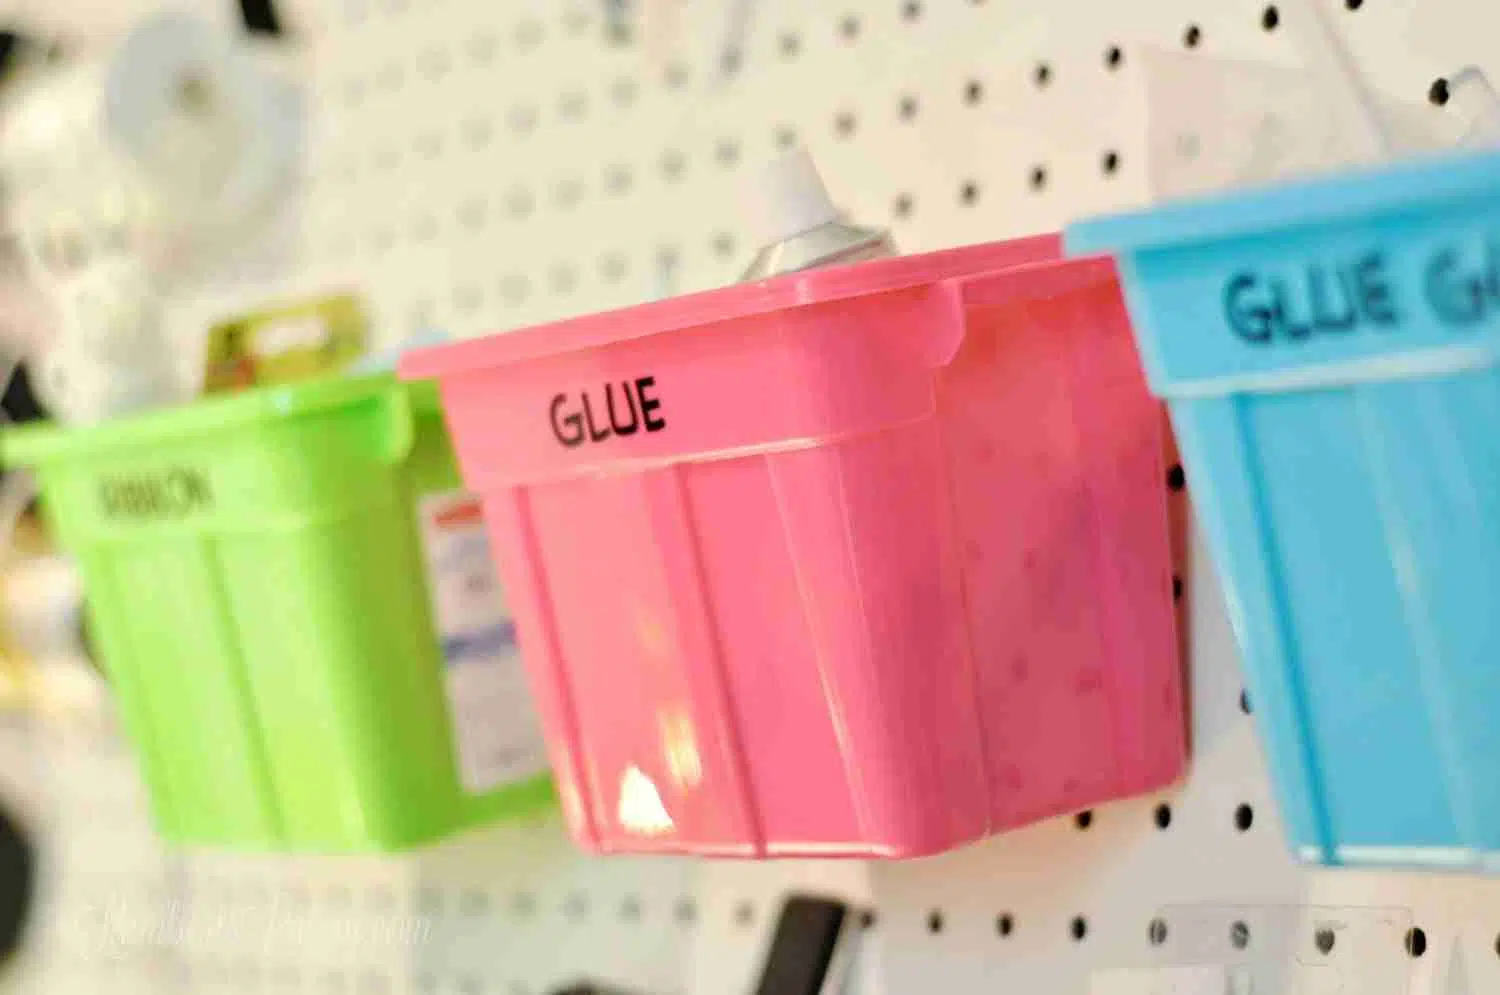 green, pink, and blue plastic bins hung on a peg board.